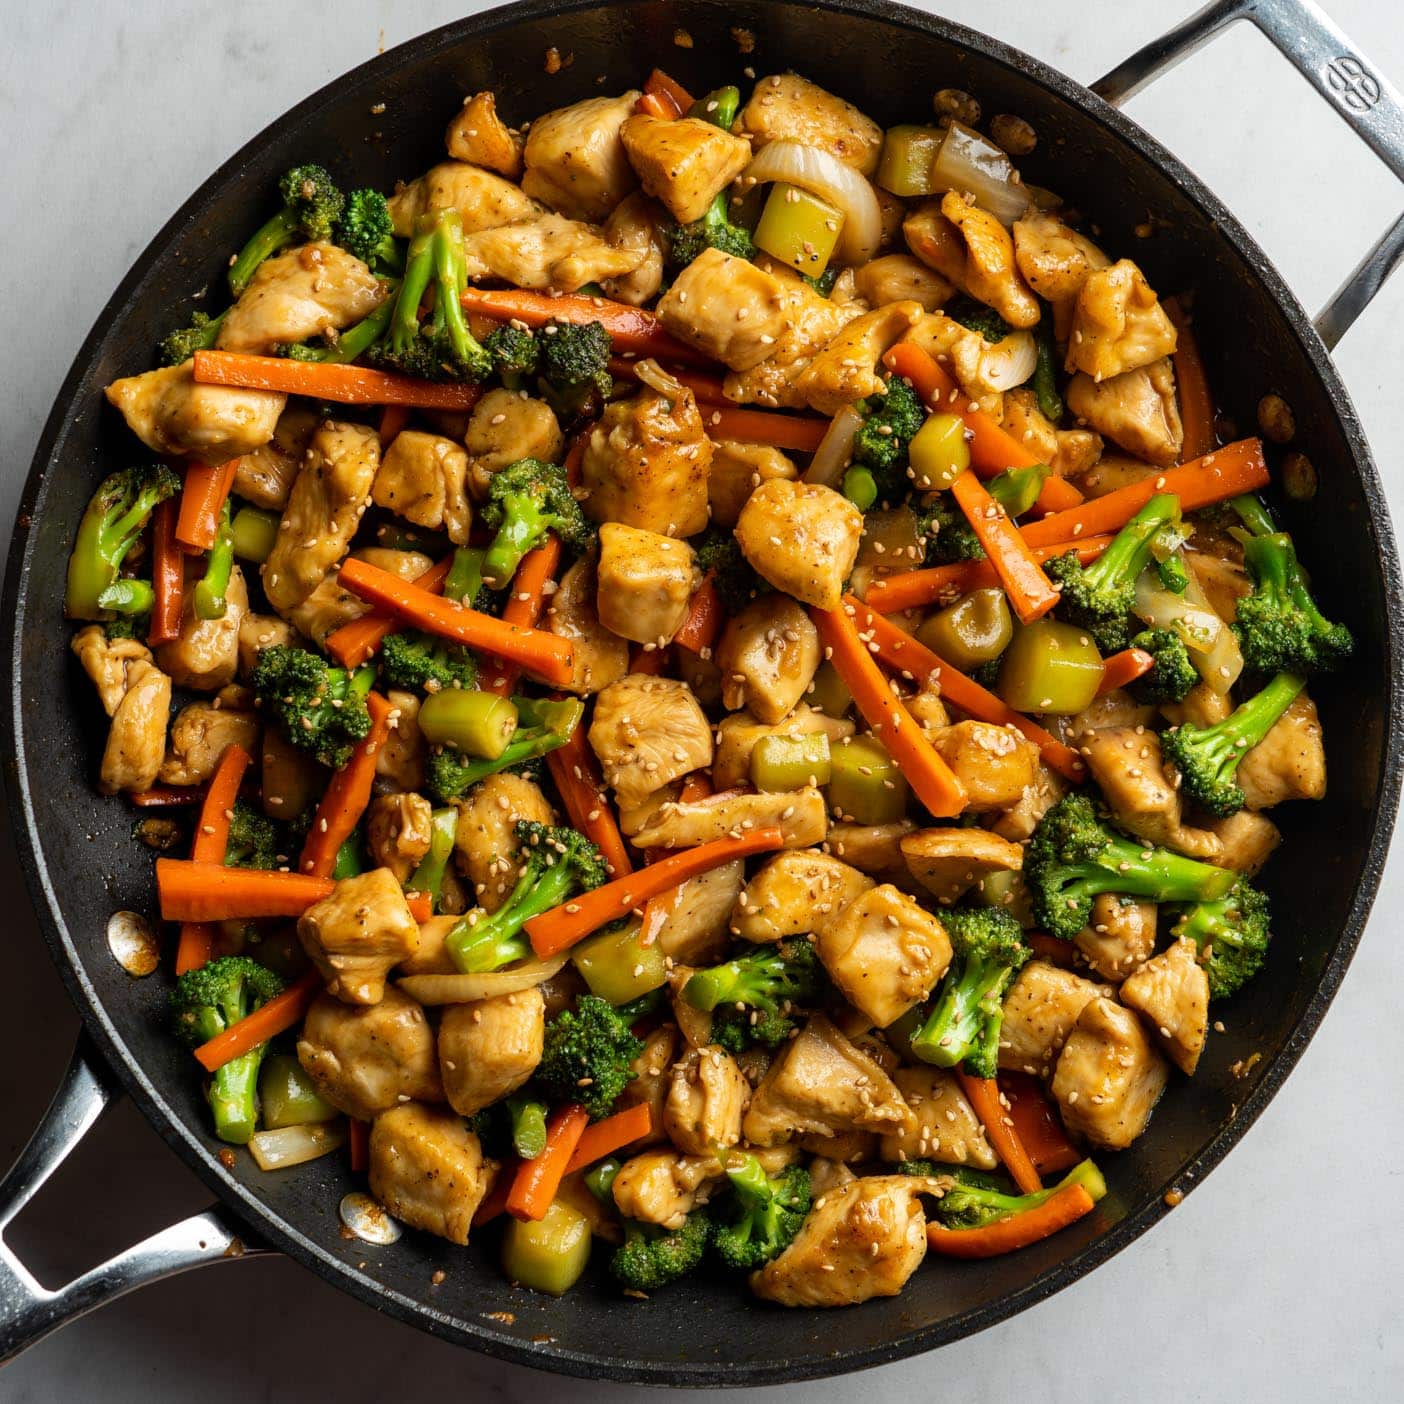 chicken and broccoli with vegetables in a pan